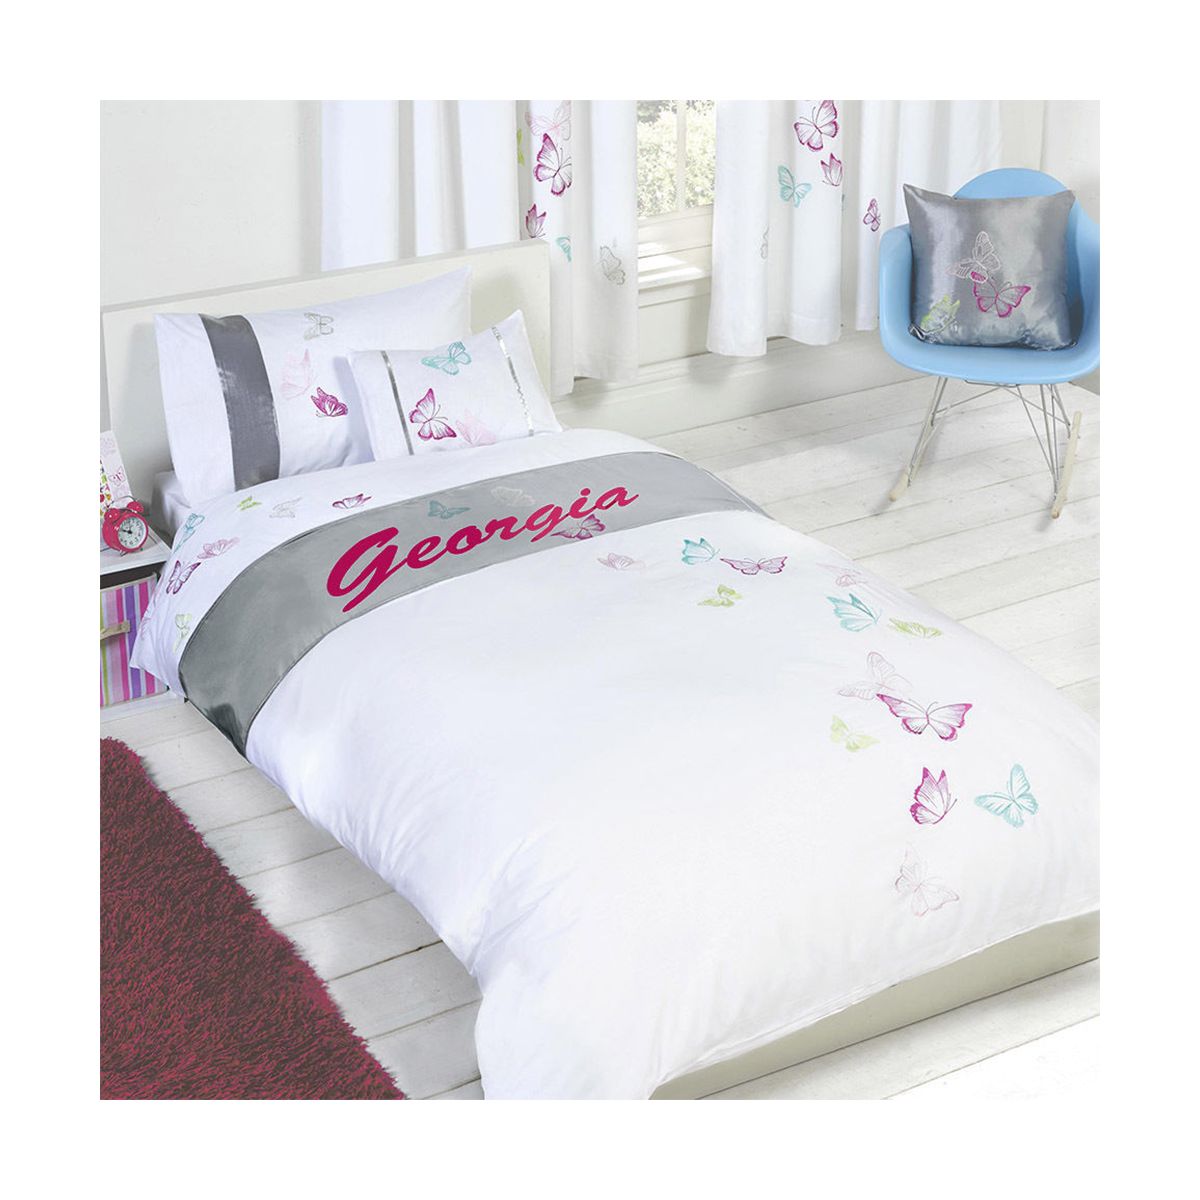 Georgia - Personalised Butterfly Duvet Cover Set